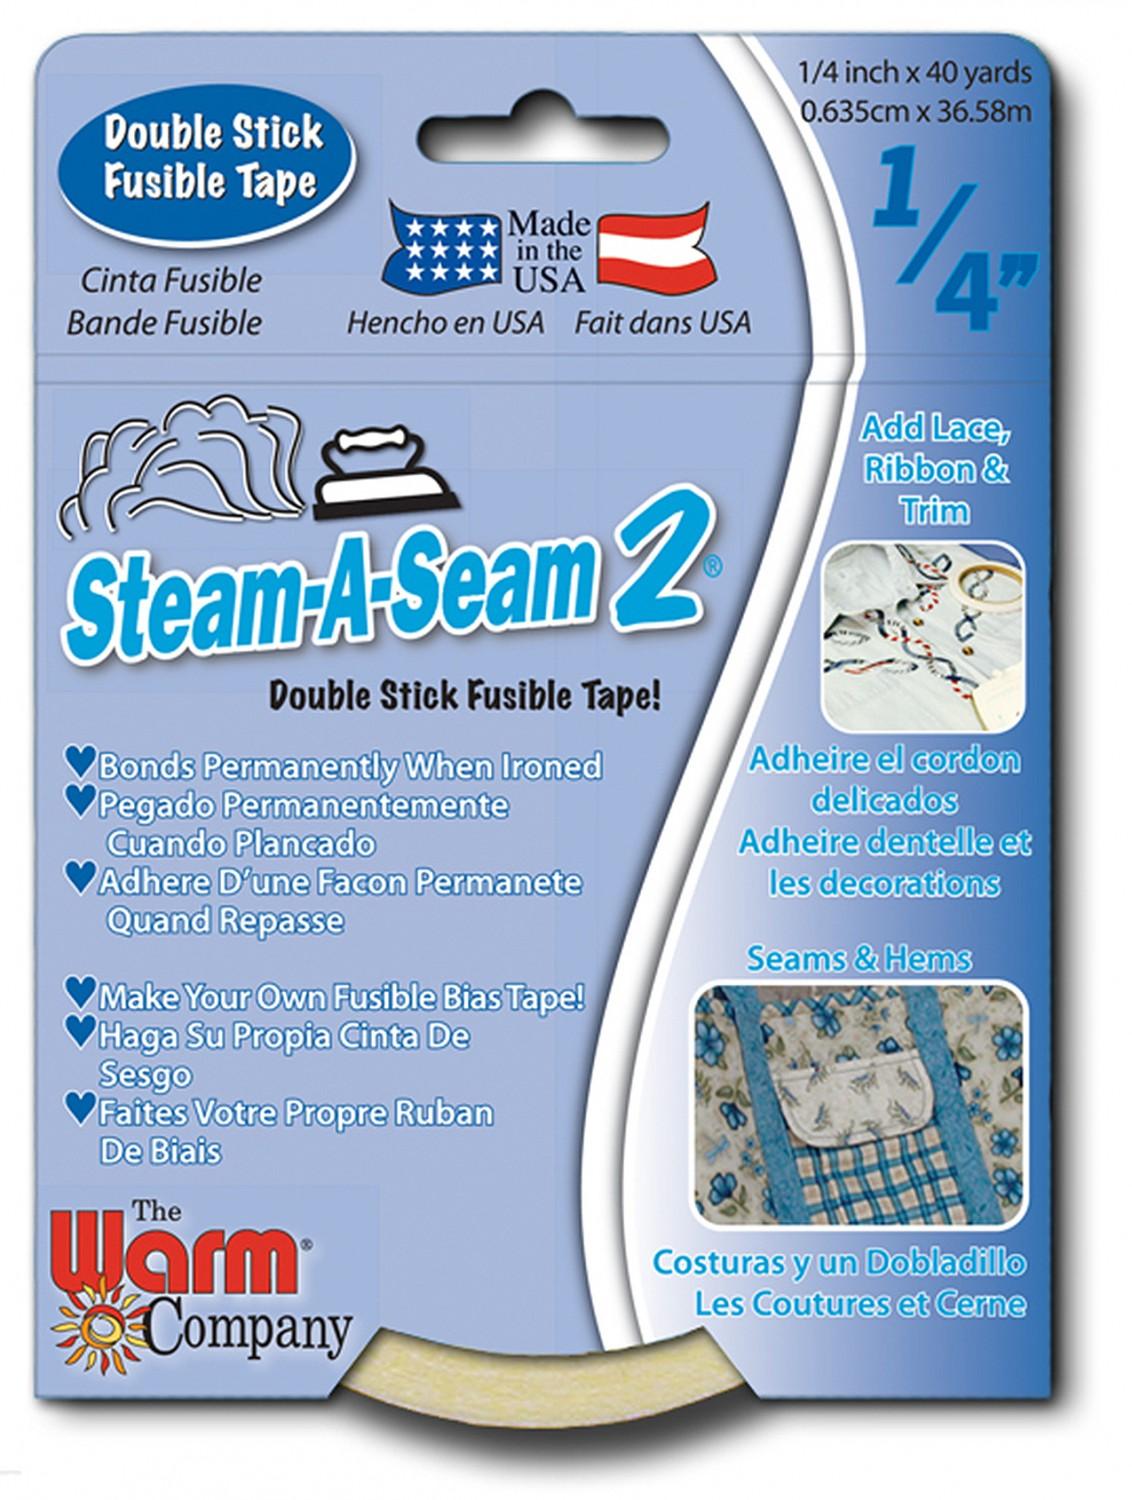 Double Stick Fusible Tape